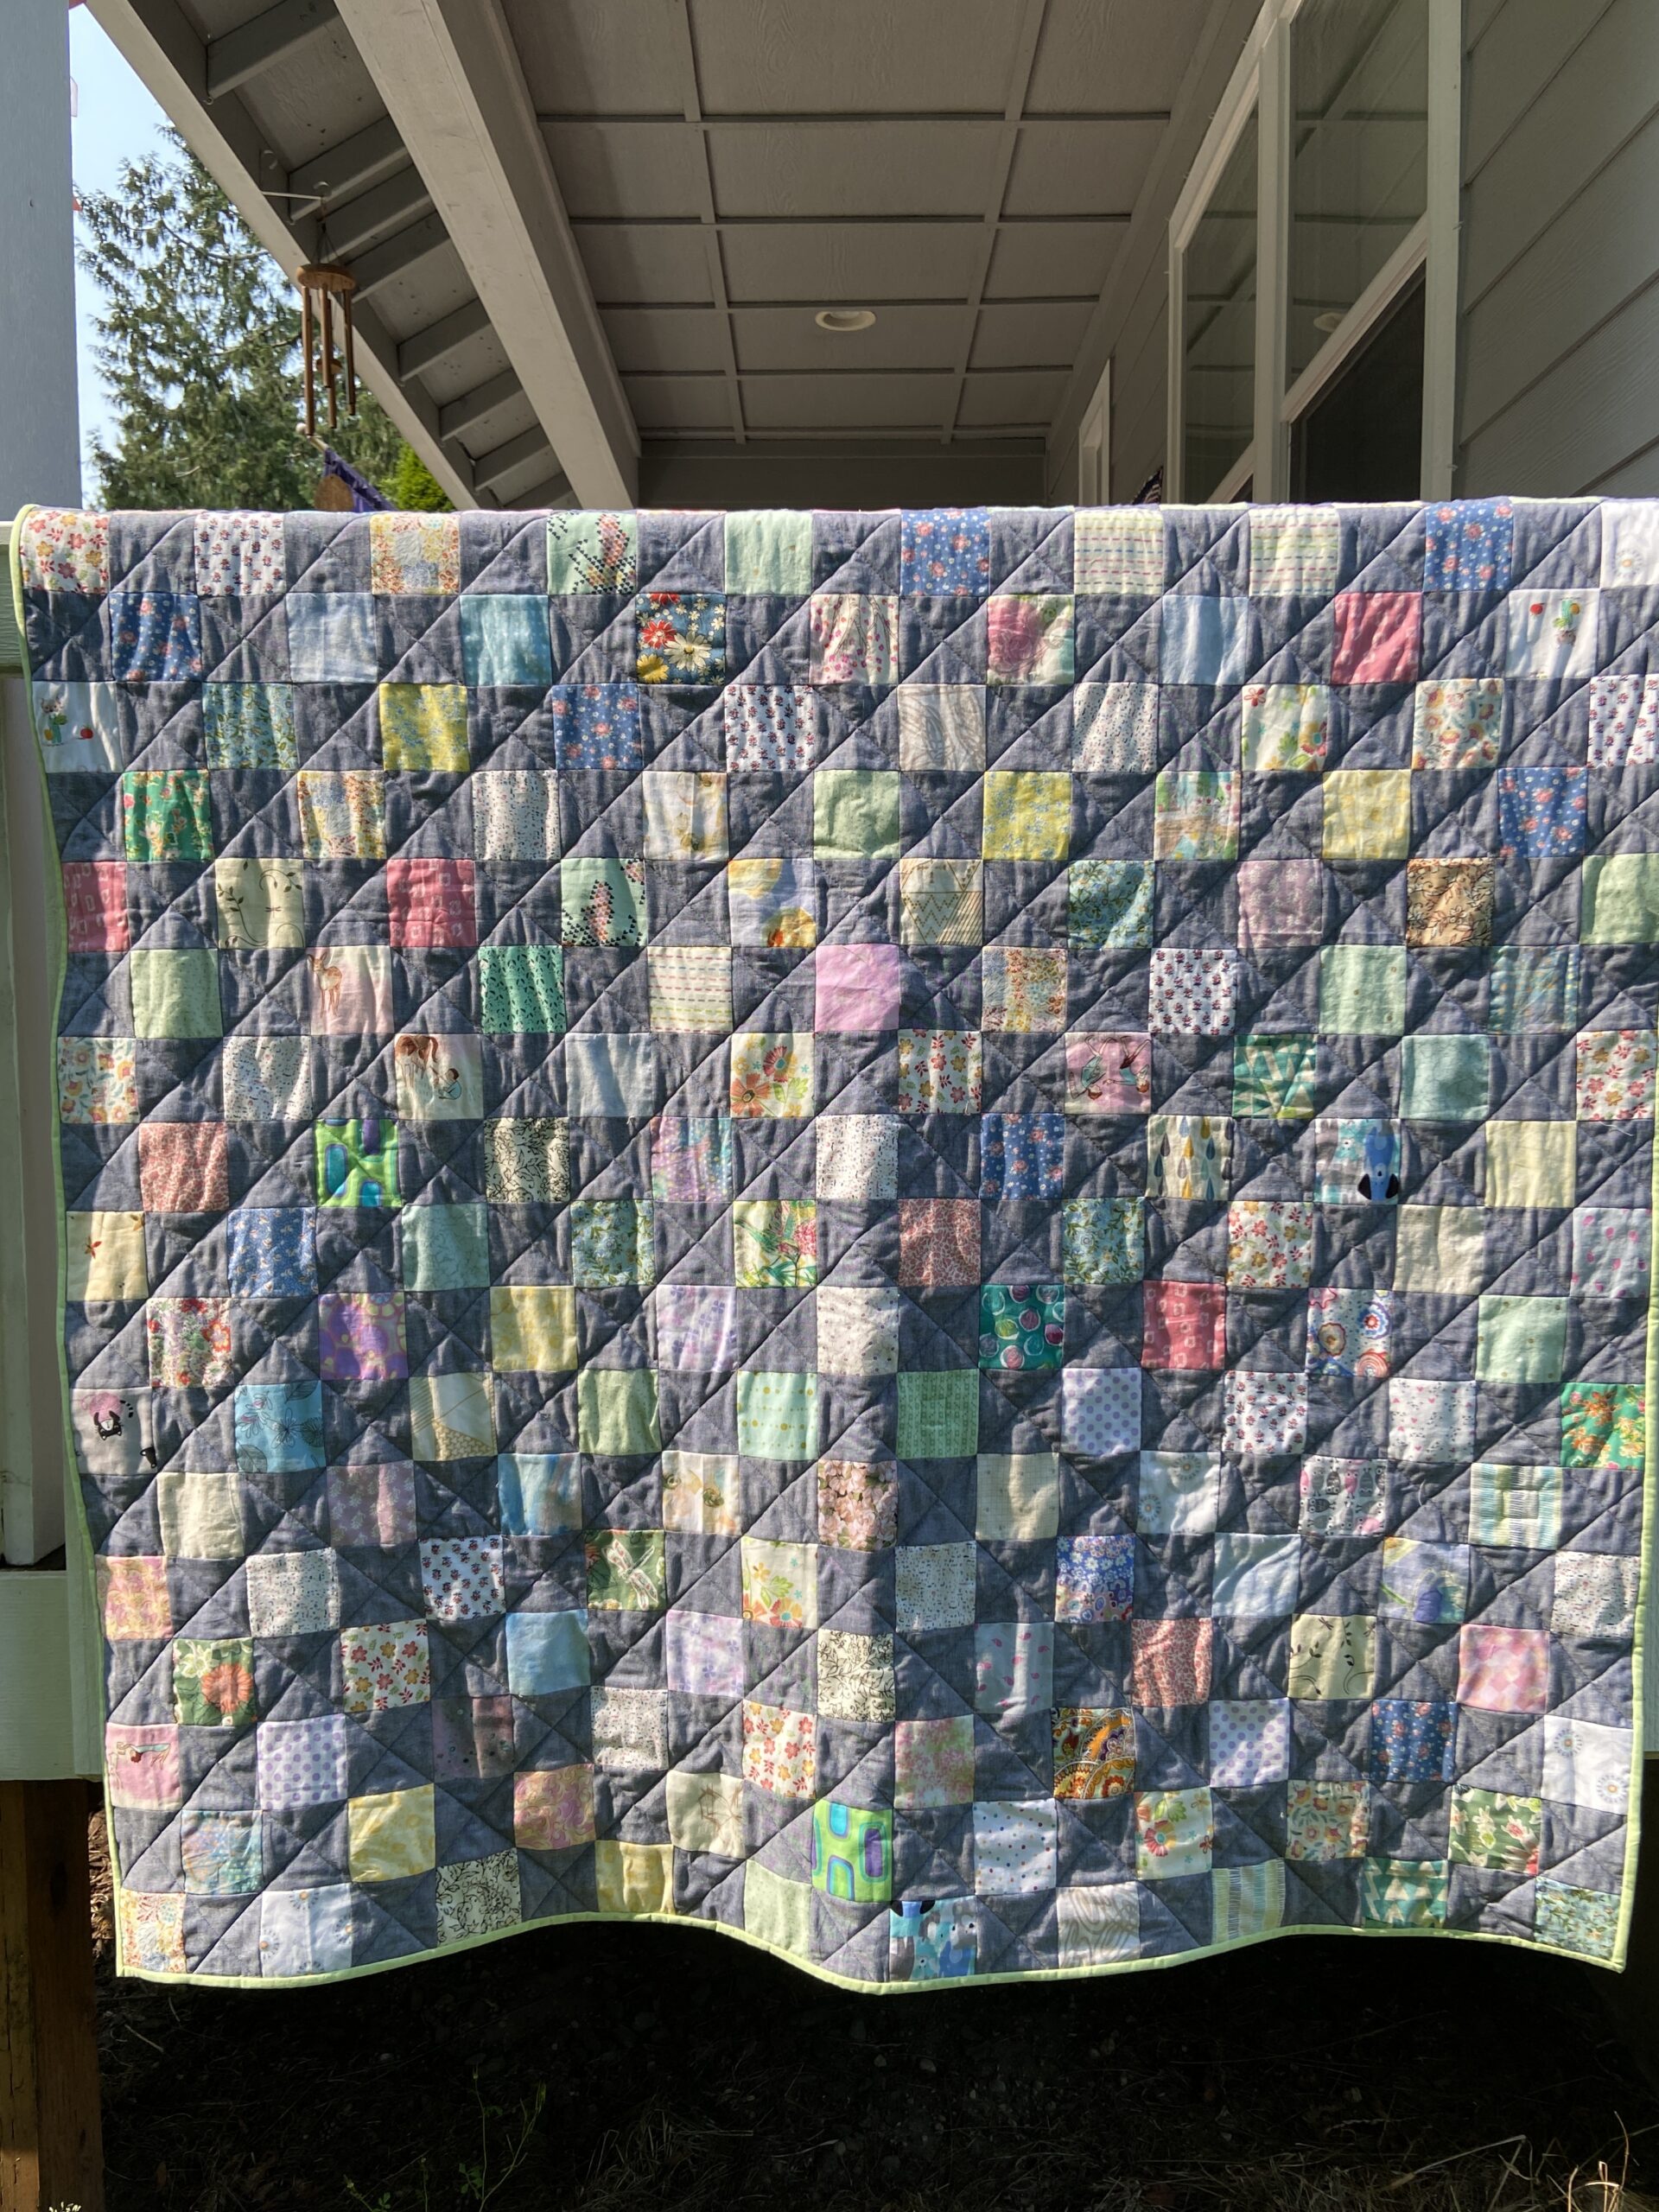 Positively Plus Mini Quilt and Crib Quilt Tutorial - Diary of a Quilter - a  quilt blog